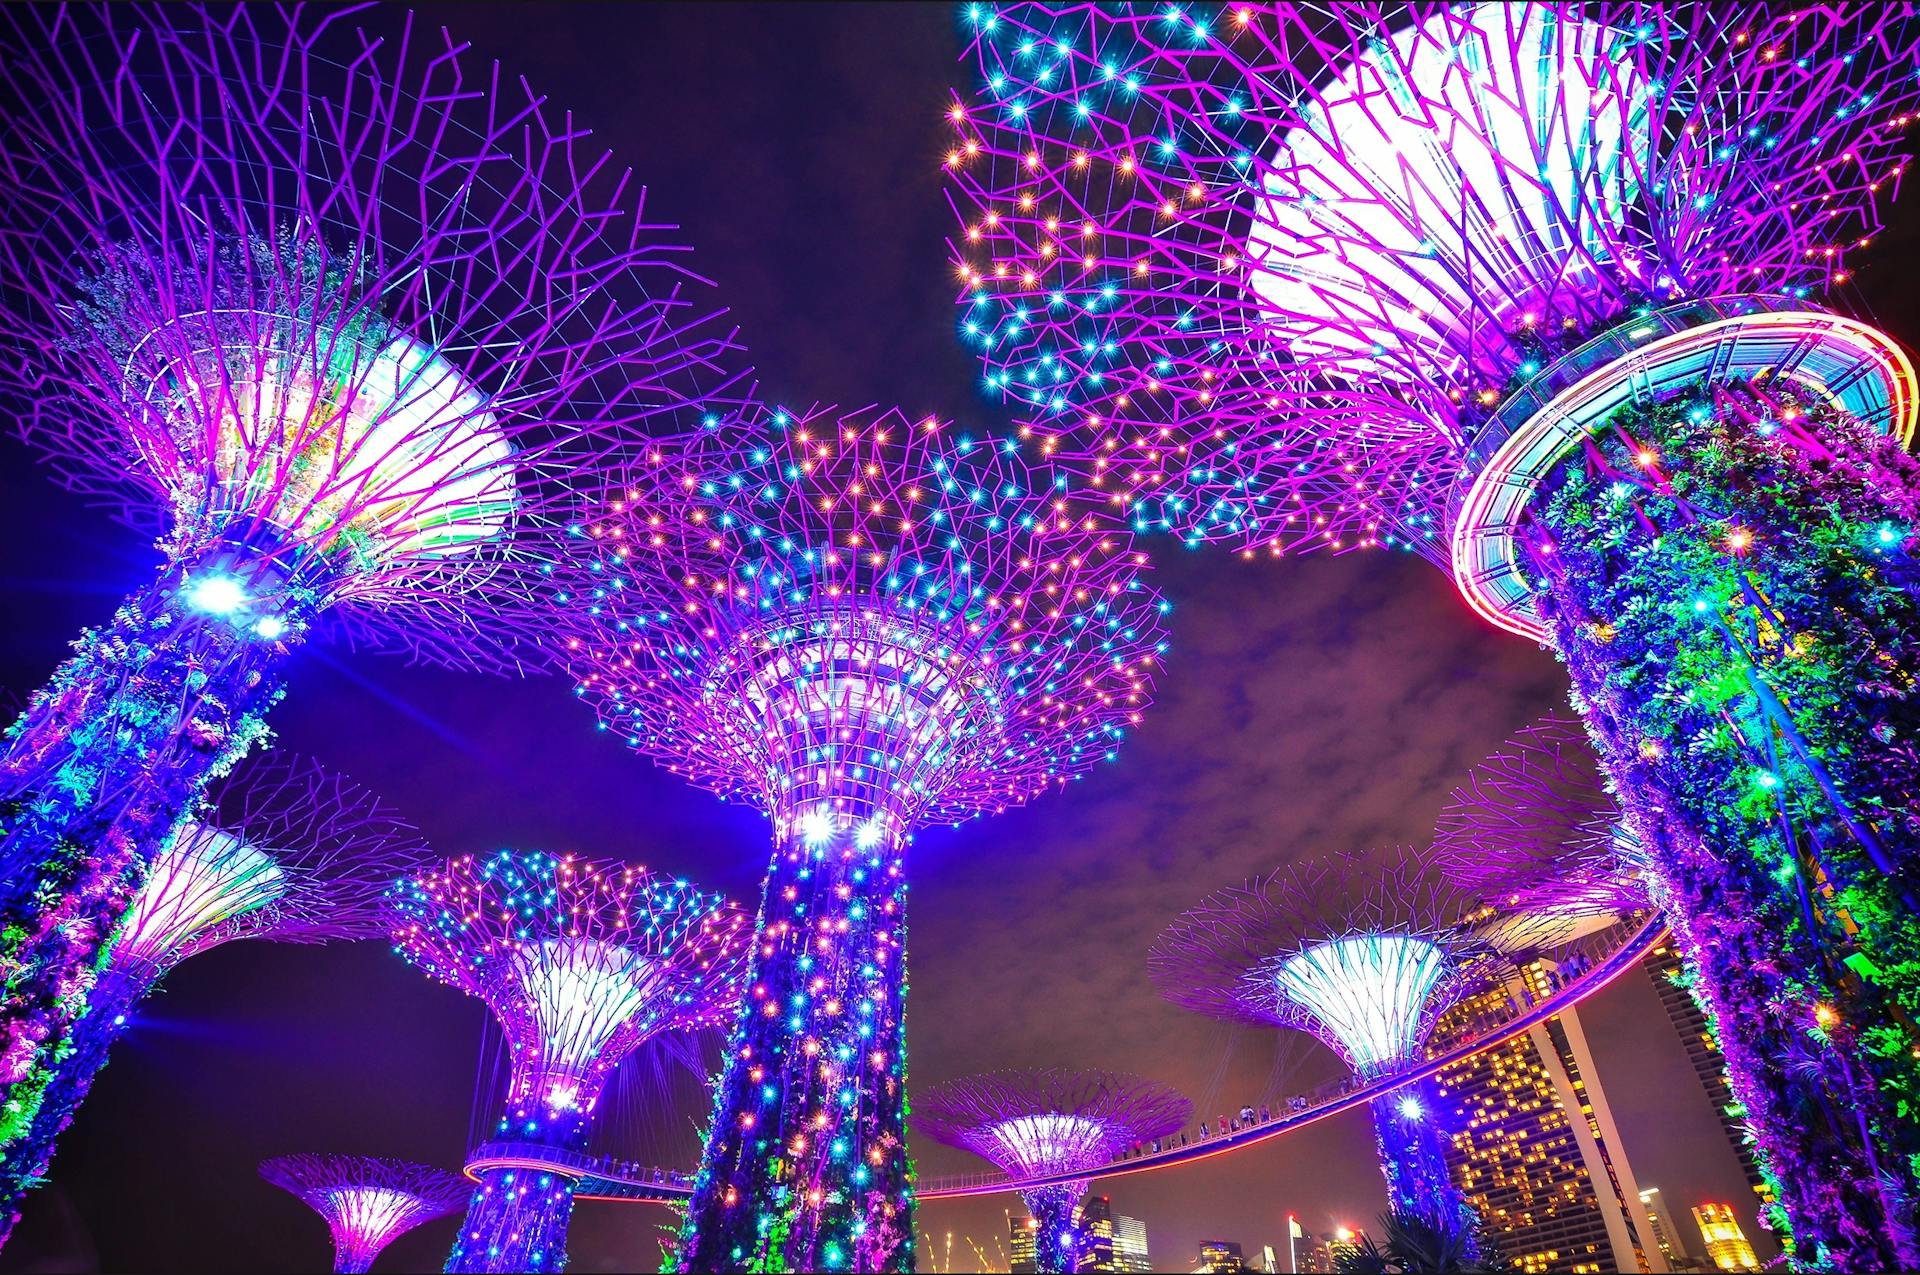 Singapore's solar trees glowing in neon colors at night.